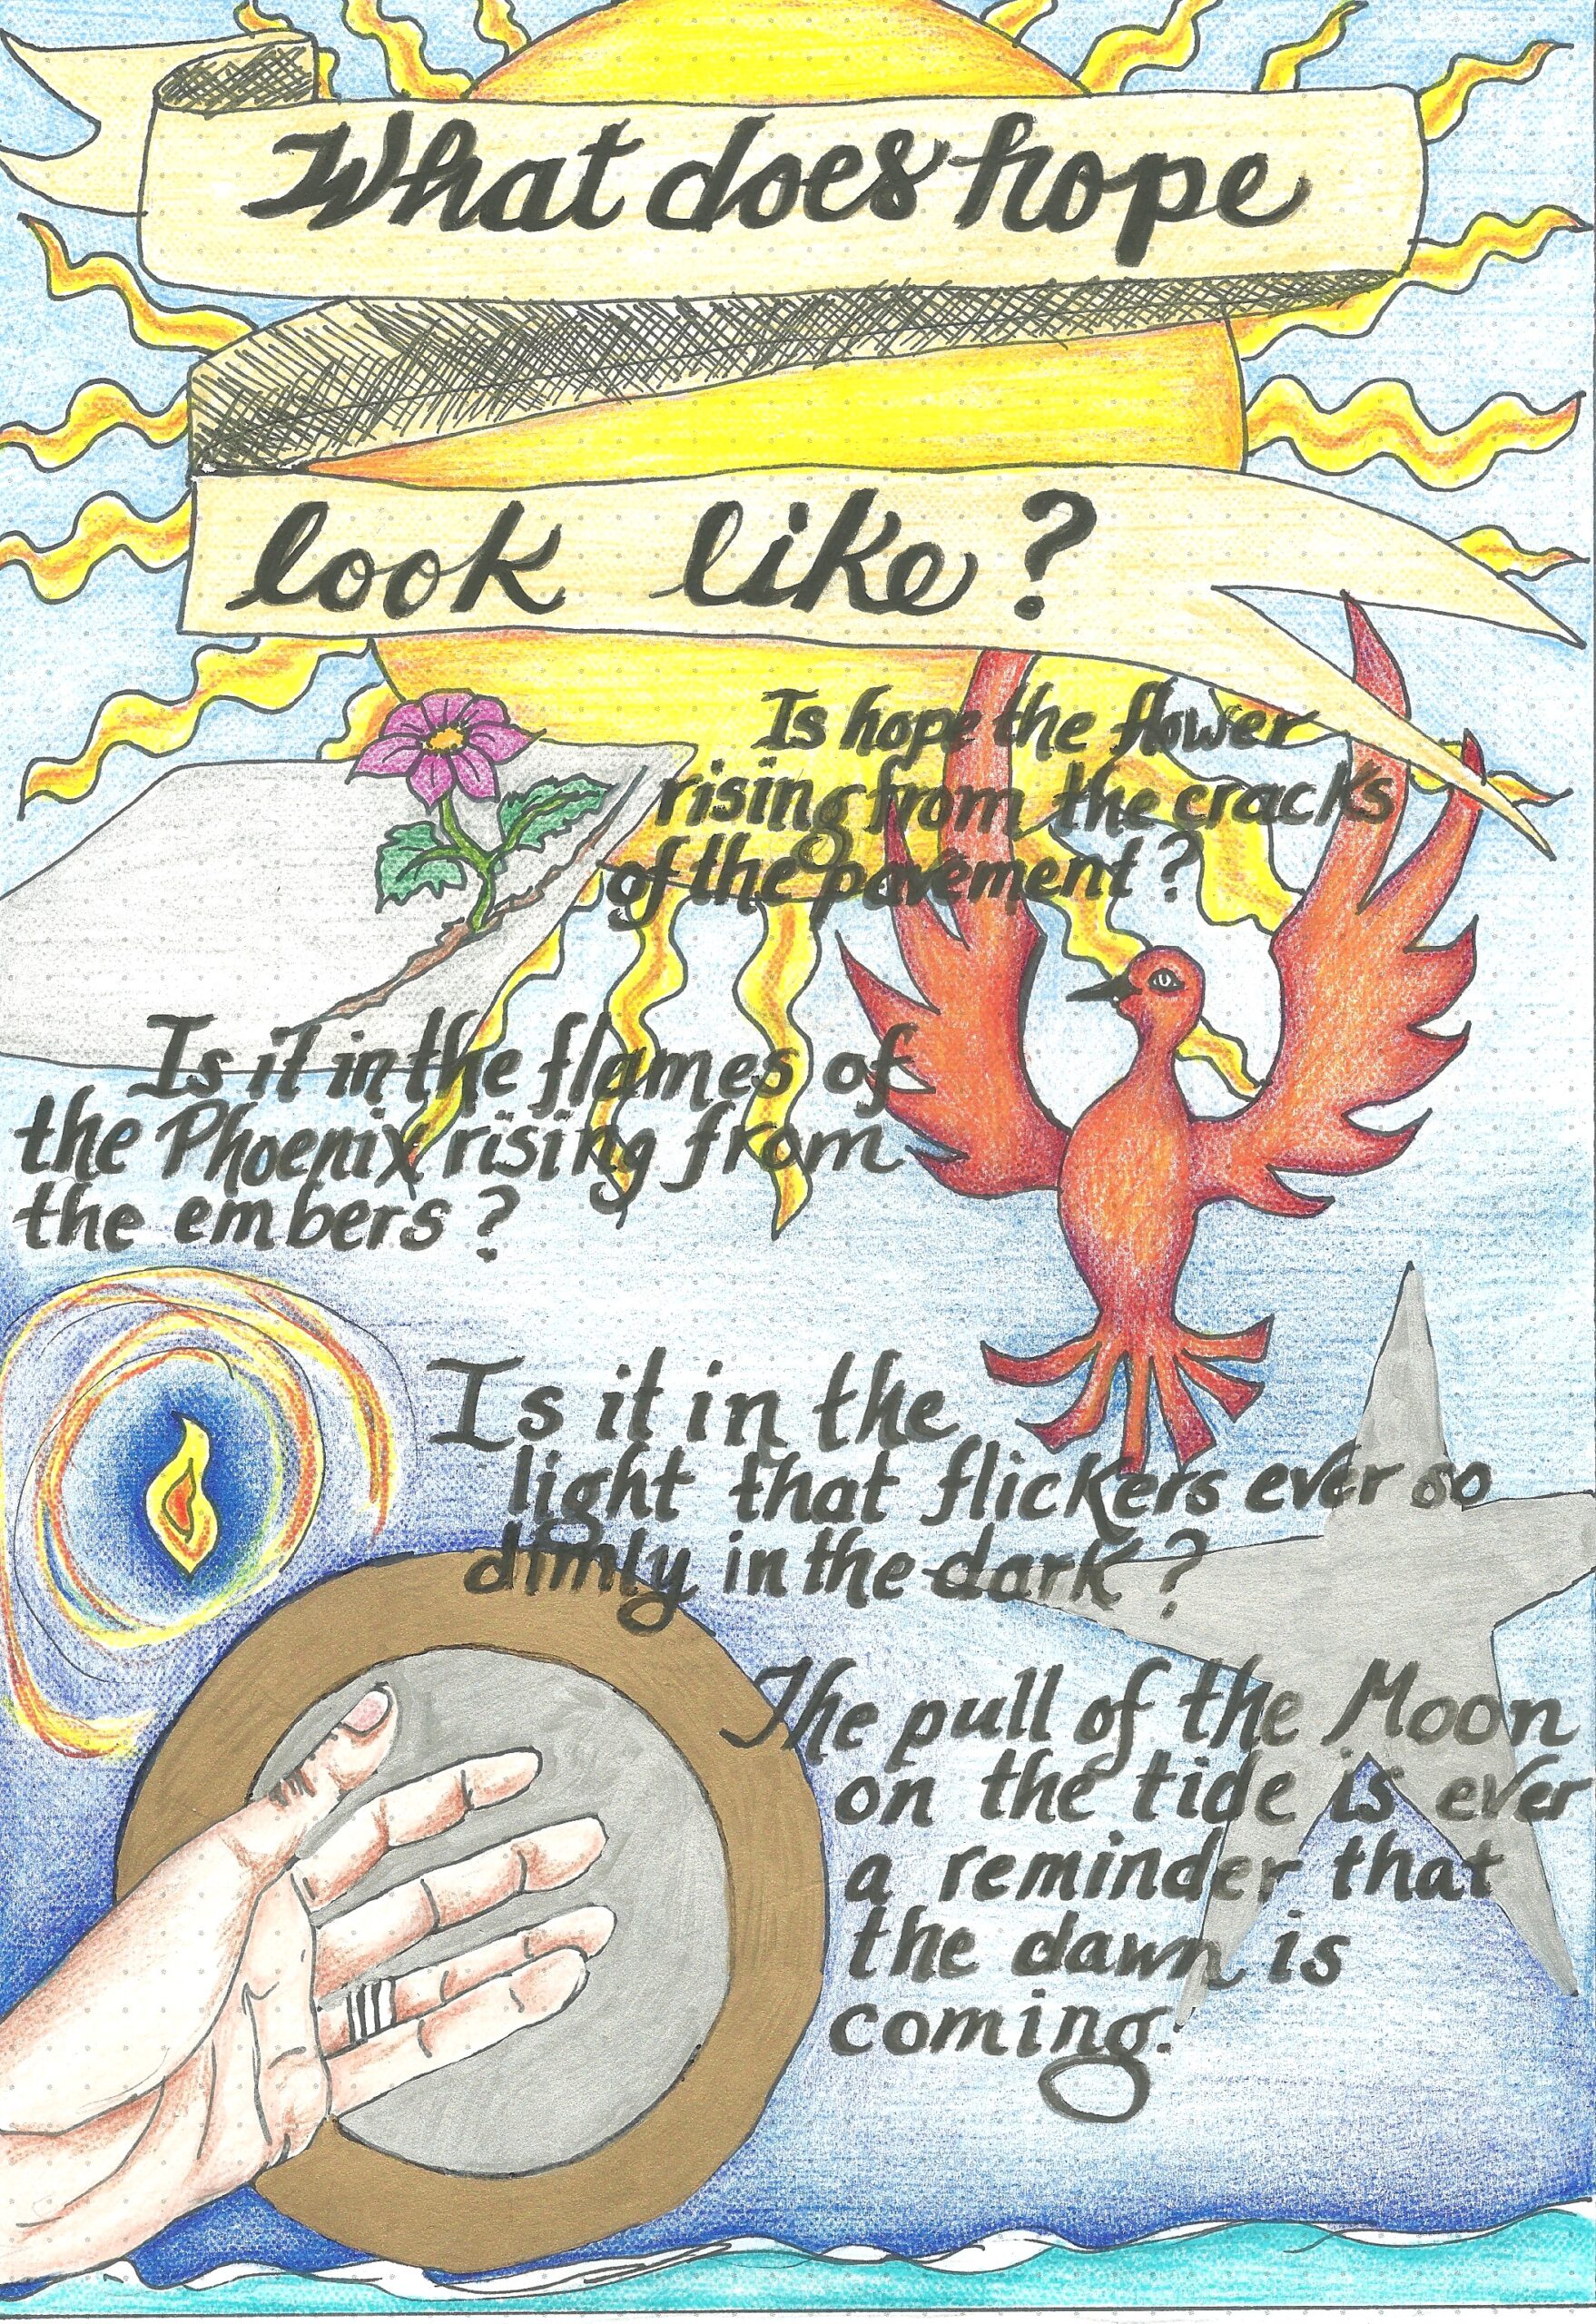 Poem: What does hope look like?  Is hope the flower rising from the cracks of the pavement?  Is it the flames of the Phoenix rising from the embers?  Is it in the light that flickers ever so dimly in the dark?  The pull of the Moon on the tide is ever a reminder that the dawn is coming.